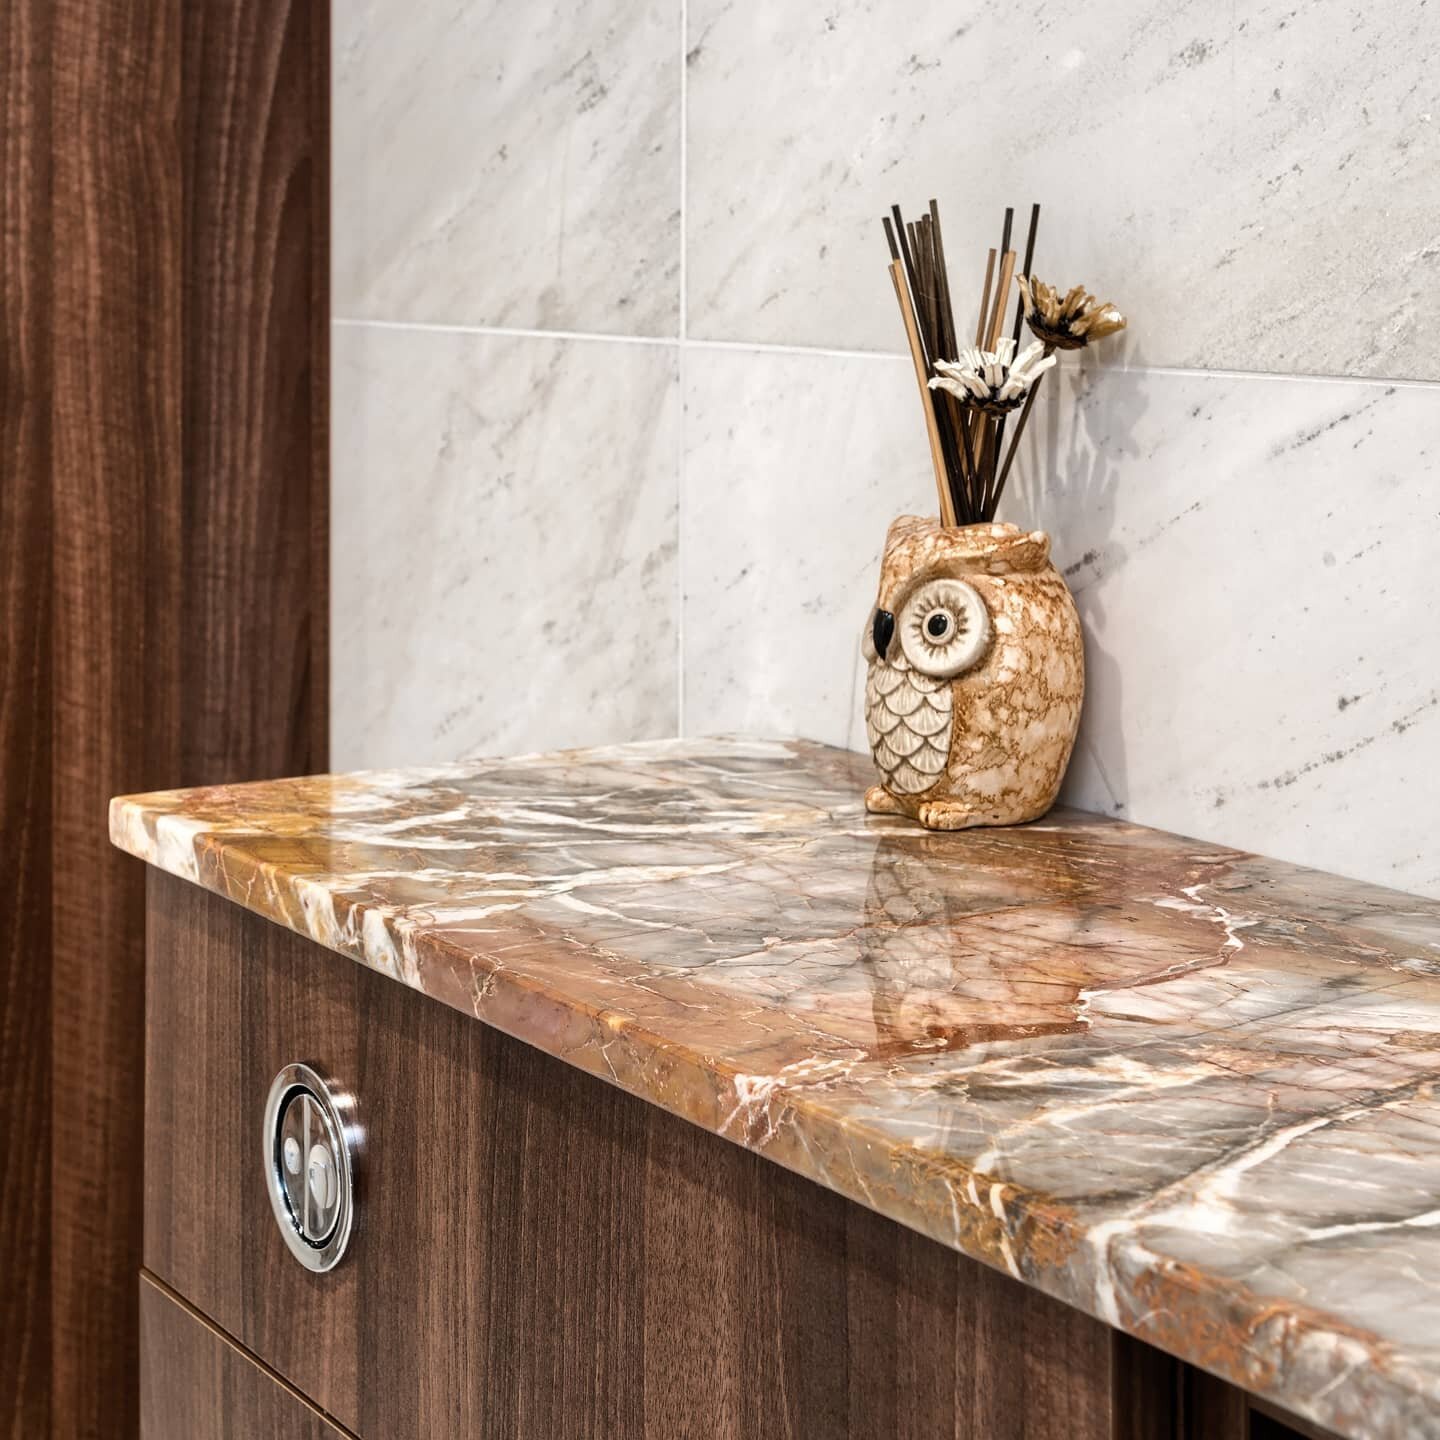 Looking back at this stunning use of our Alexandrian White and Breccia, both beautifully showcased in this St Albans bathroom. #TBT
&nbsp;
#marble&nbsp;#foxmarble&nbsp;#naturalstone&nbsp;#luxurystone&nbsp;#interiors #interiordesign #marbledesign #hom